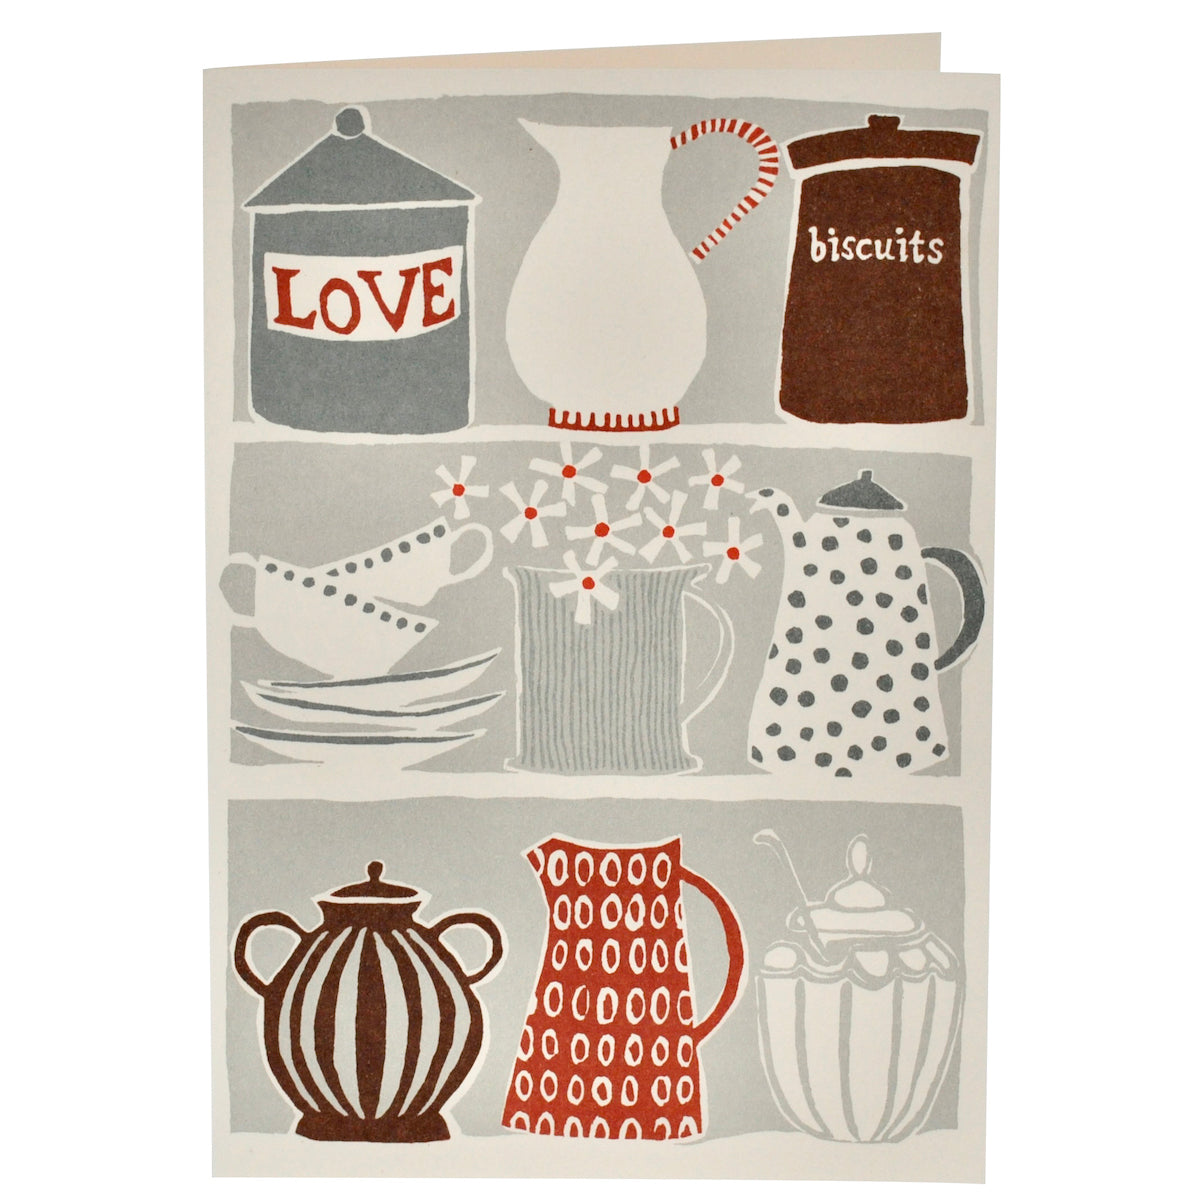 Love Biscuits Card